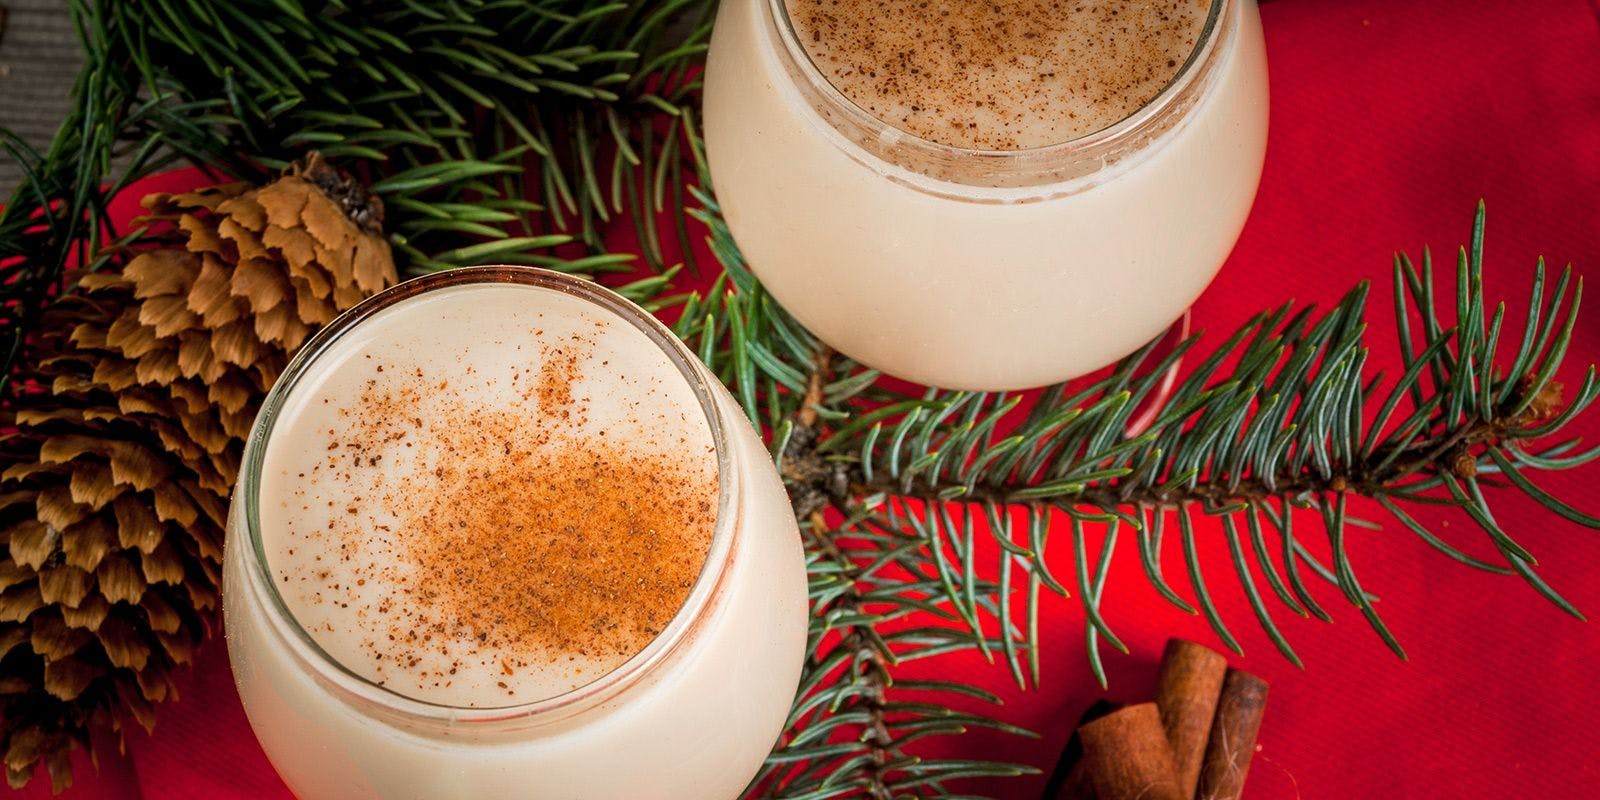 Glasses of eggnog dusted with nutmeg with evergreen branches, pine cones and cinnamon sticks around them on a red tablecloth.